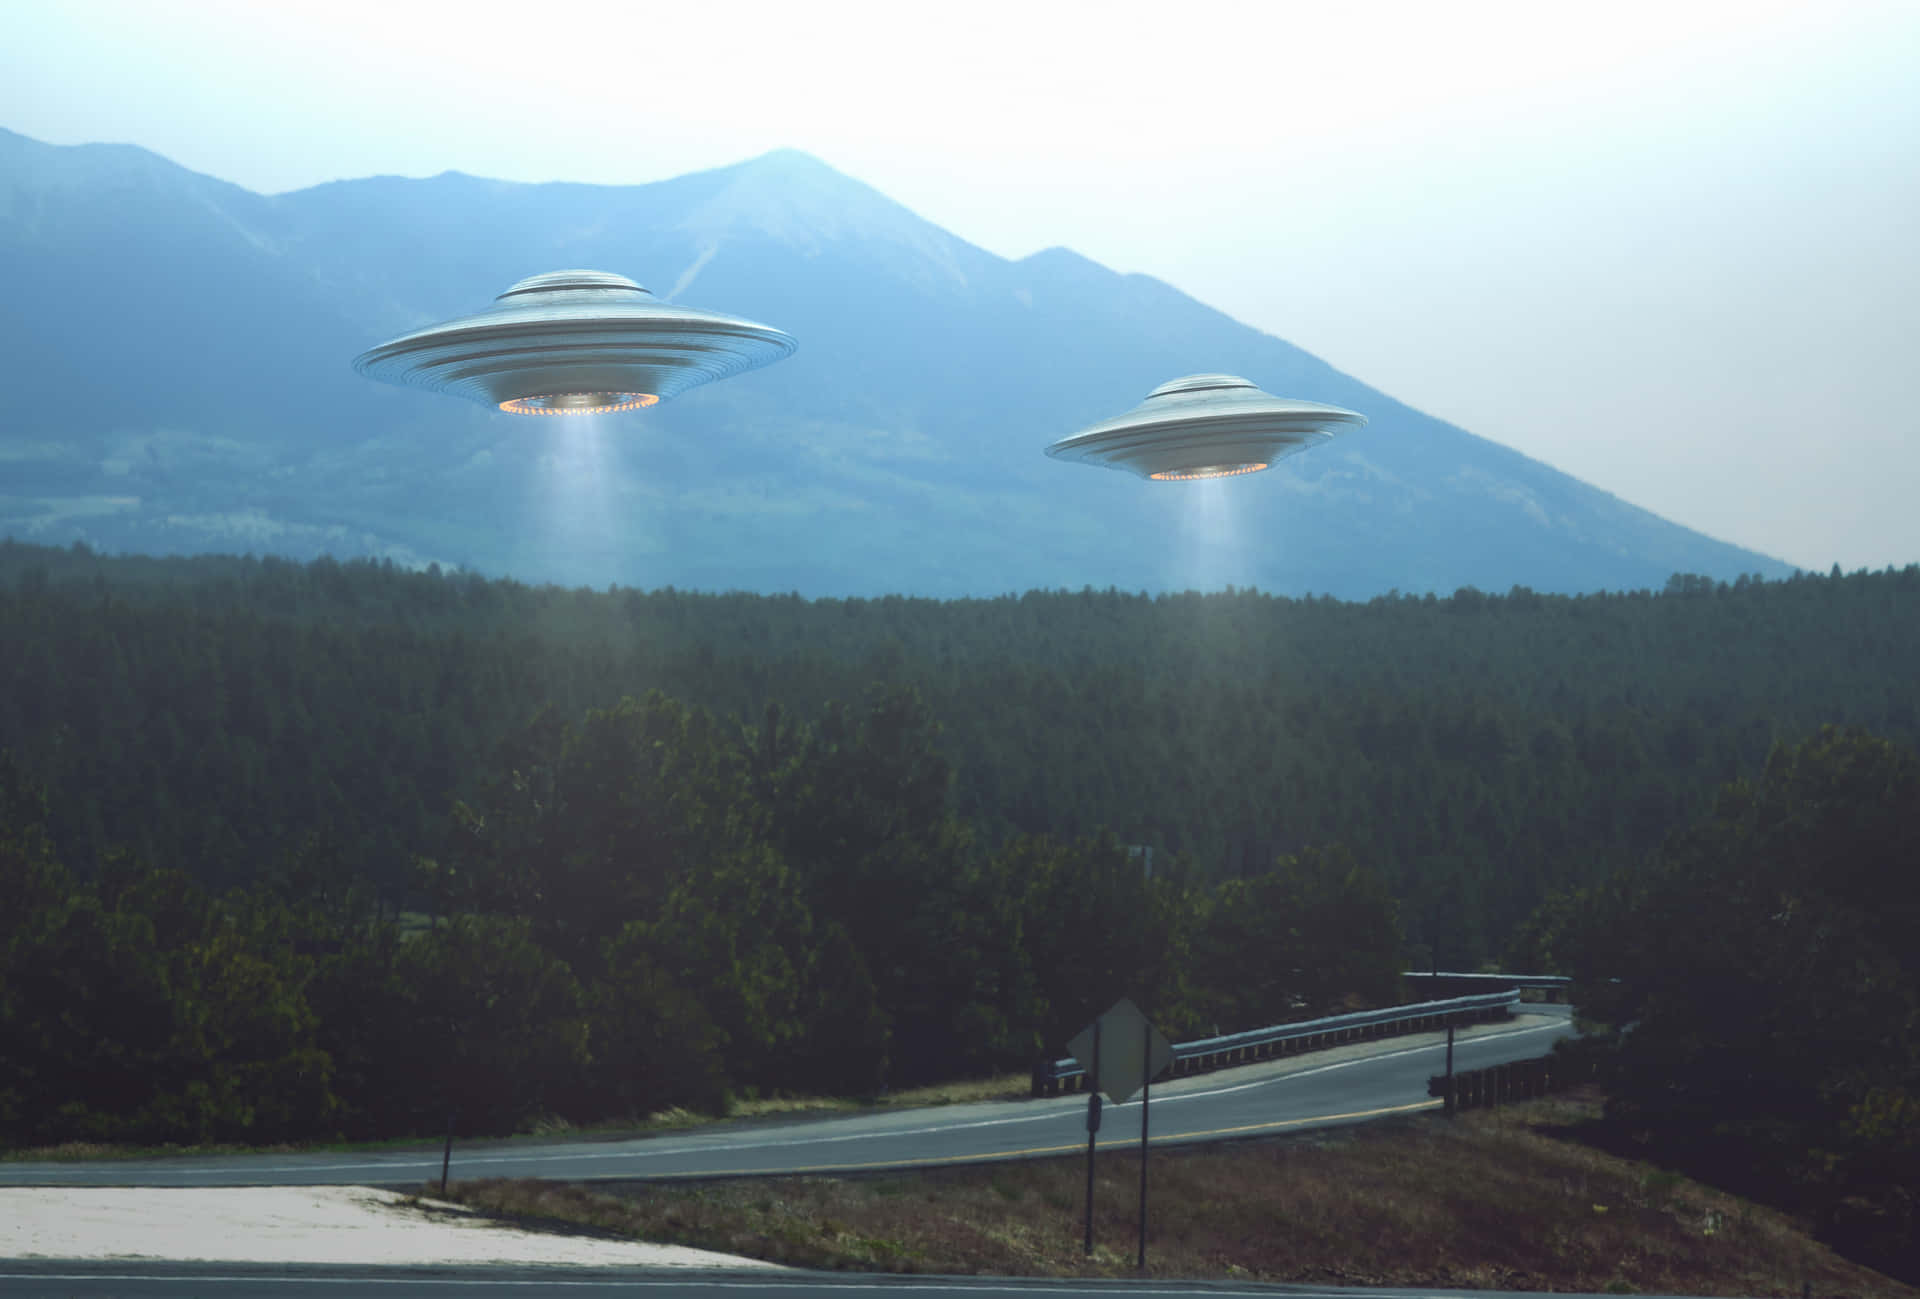 Two Ufos Flying Over A Road In The Mountains